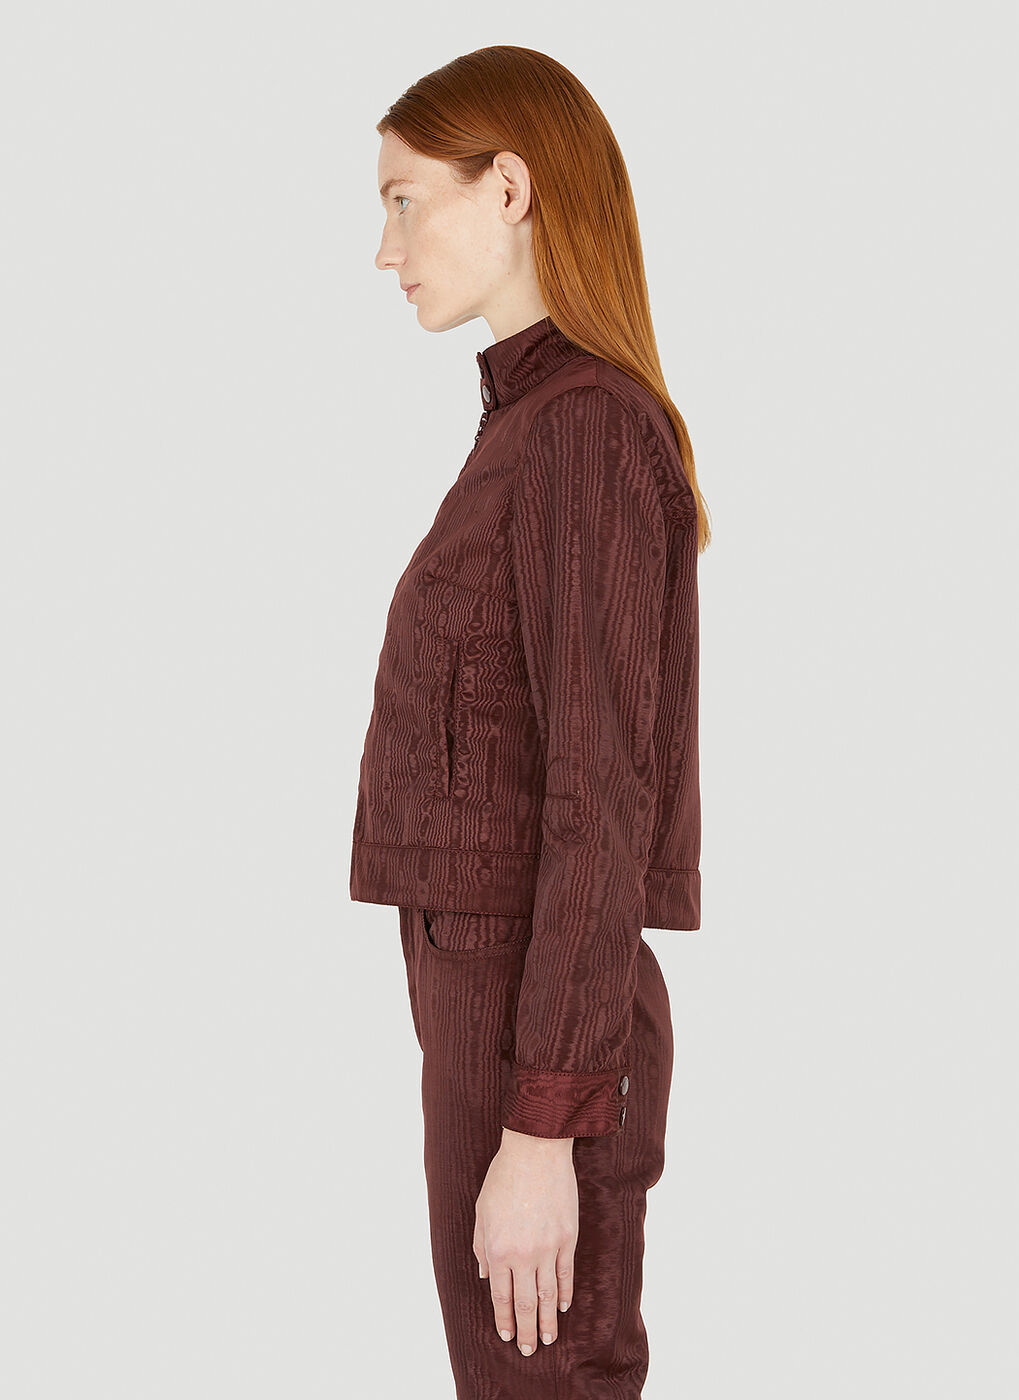 Boxy Moire Track Jacket in Brown Marine Serre